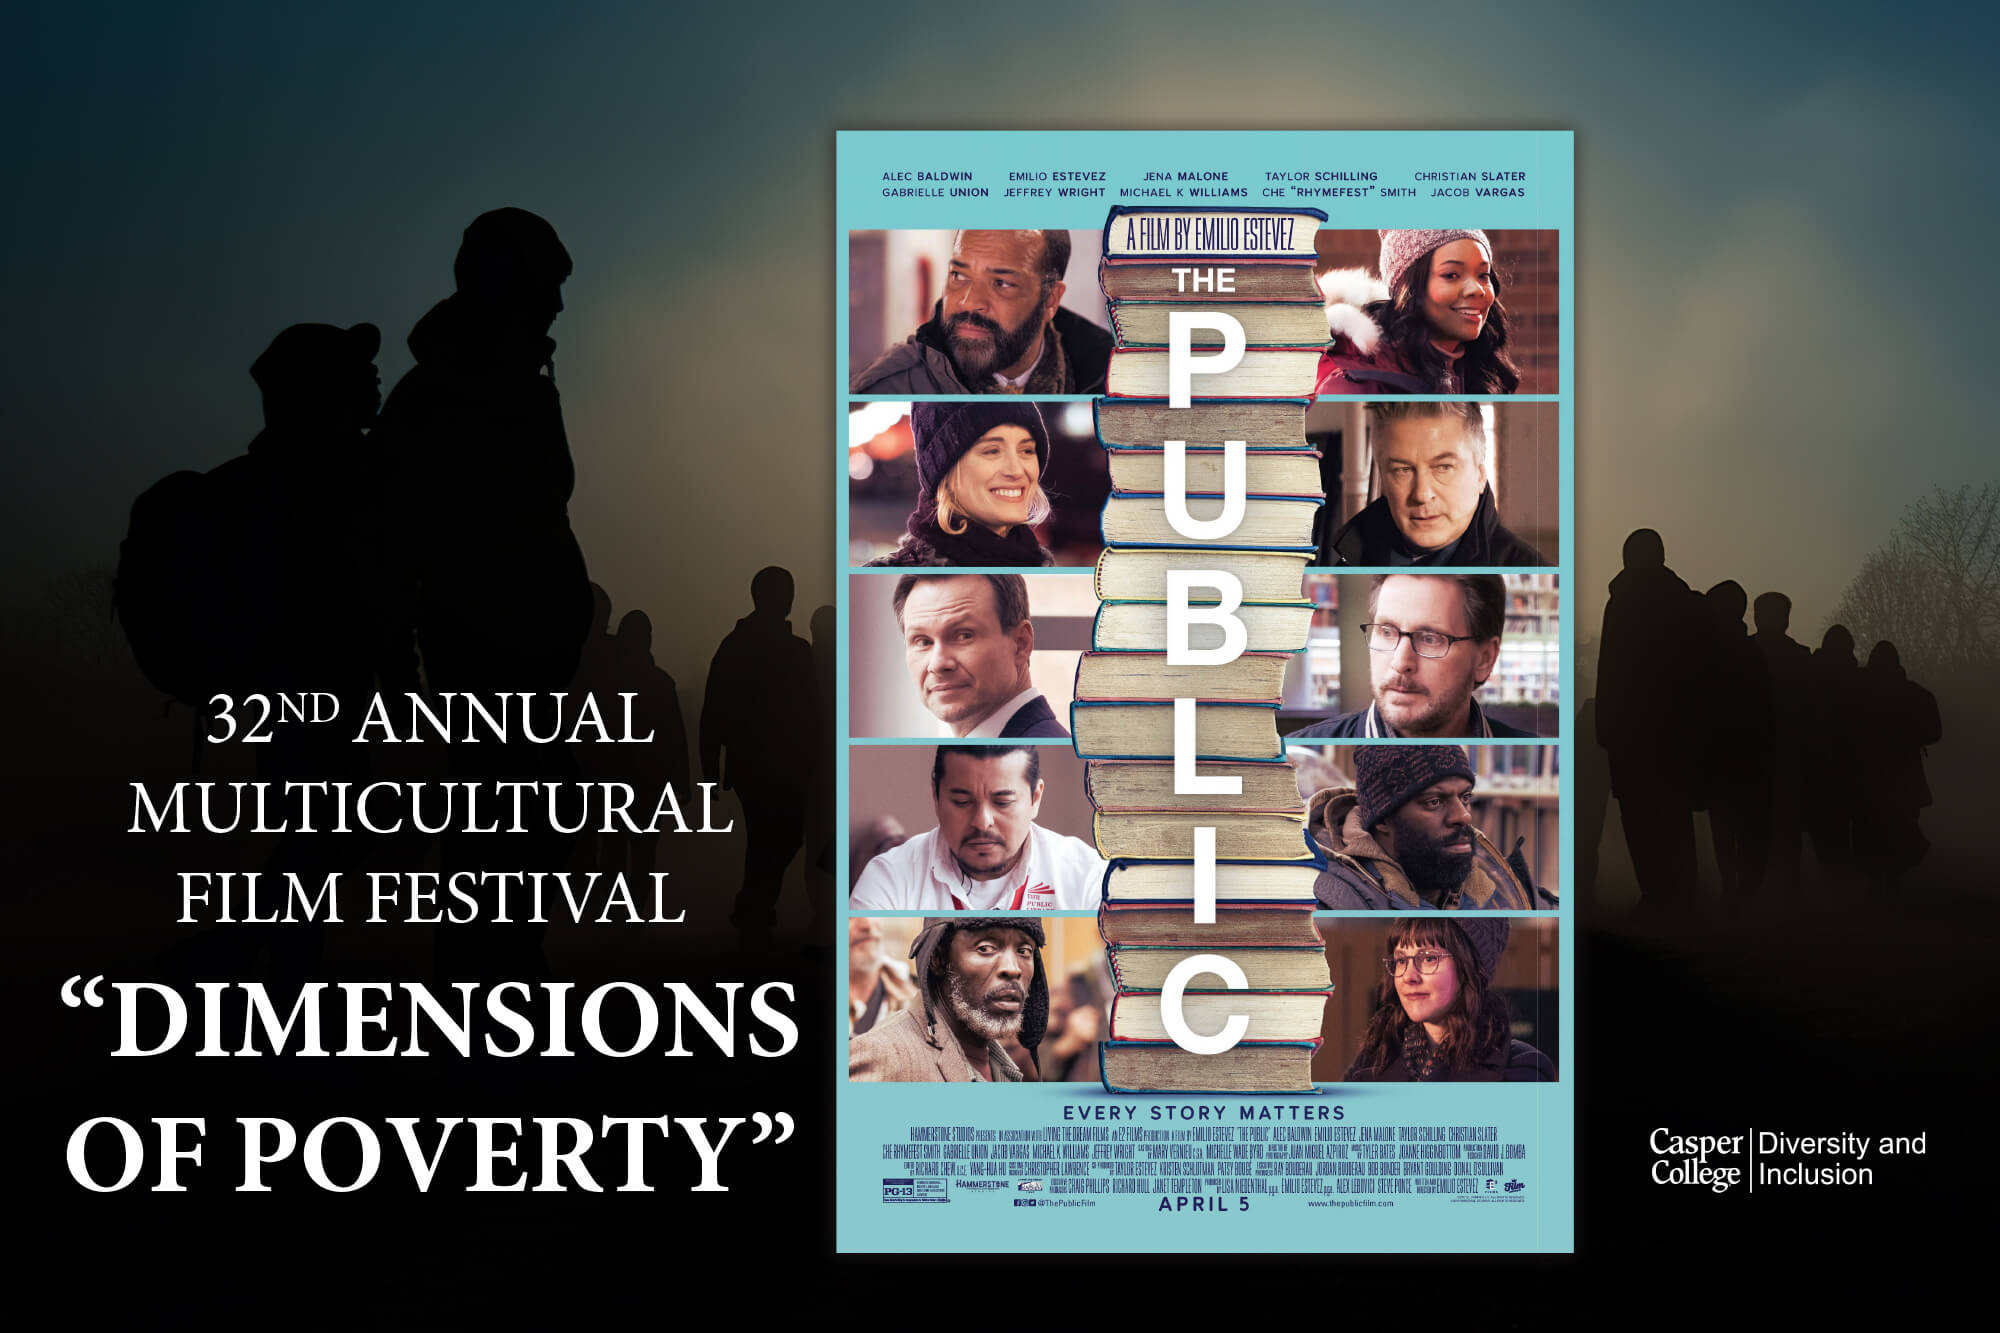 Image for Multicultural Film "The Public" press release.